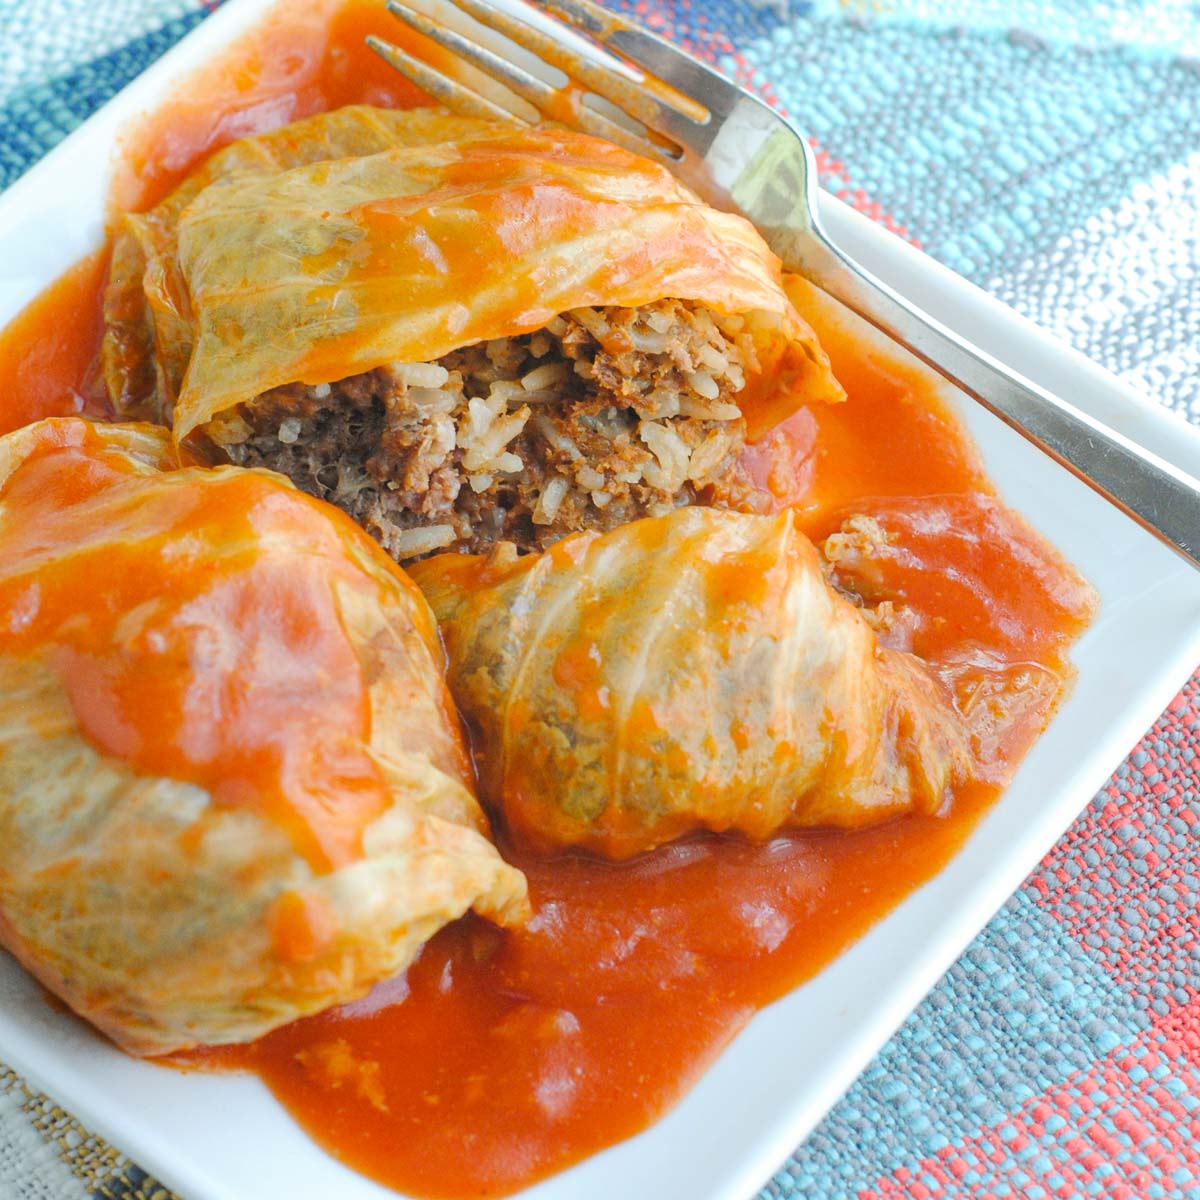 Golubtsi stuffed with ground beef and rice on a plate.